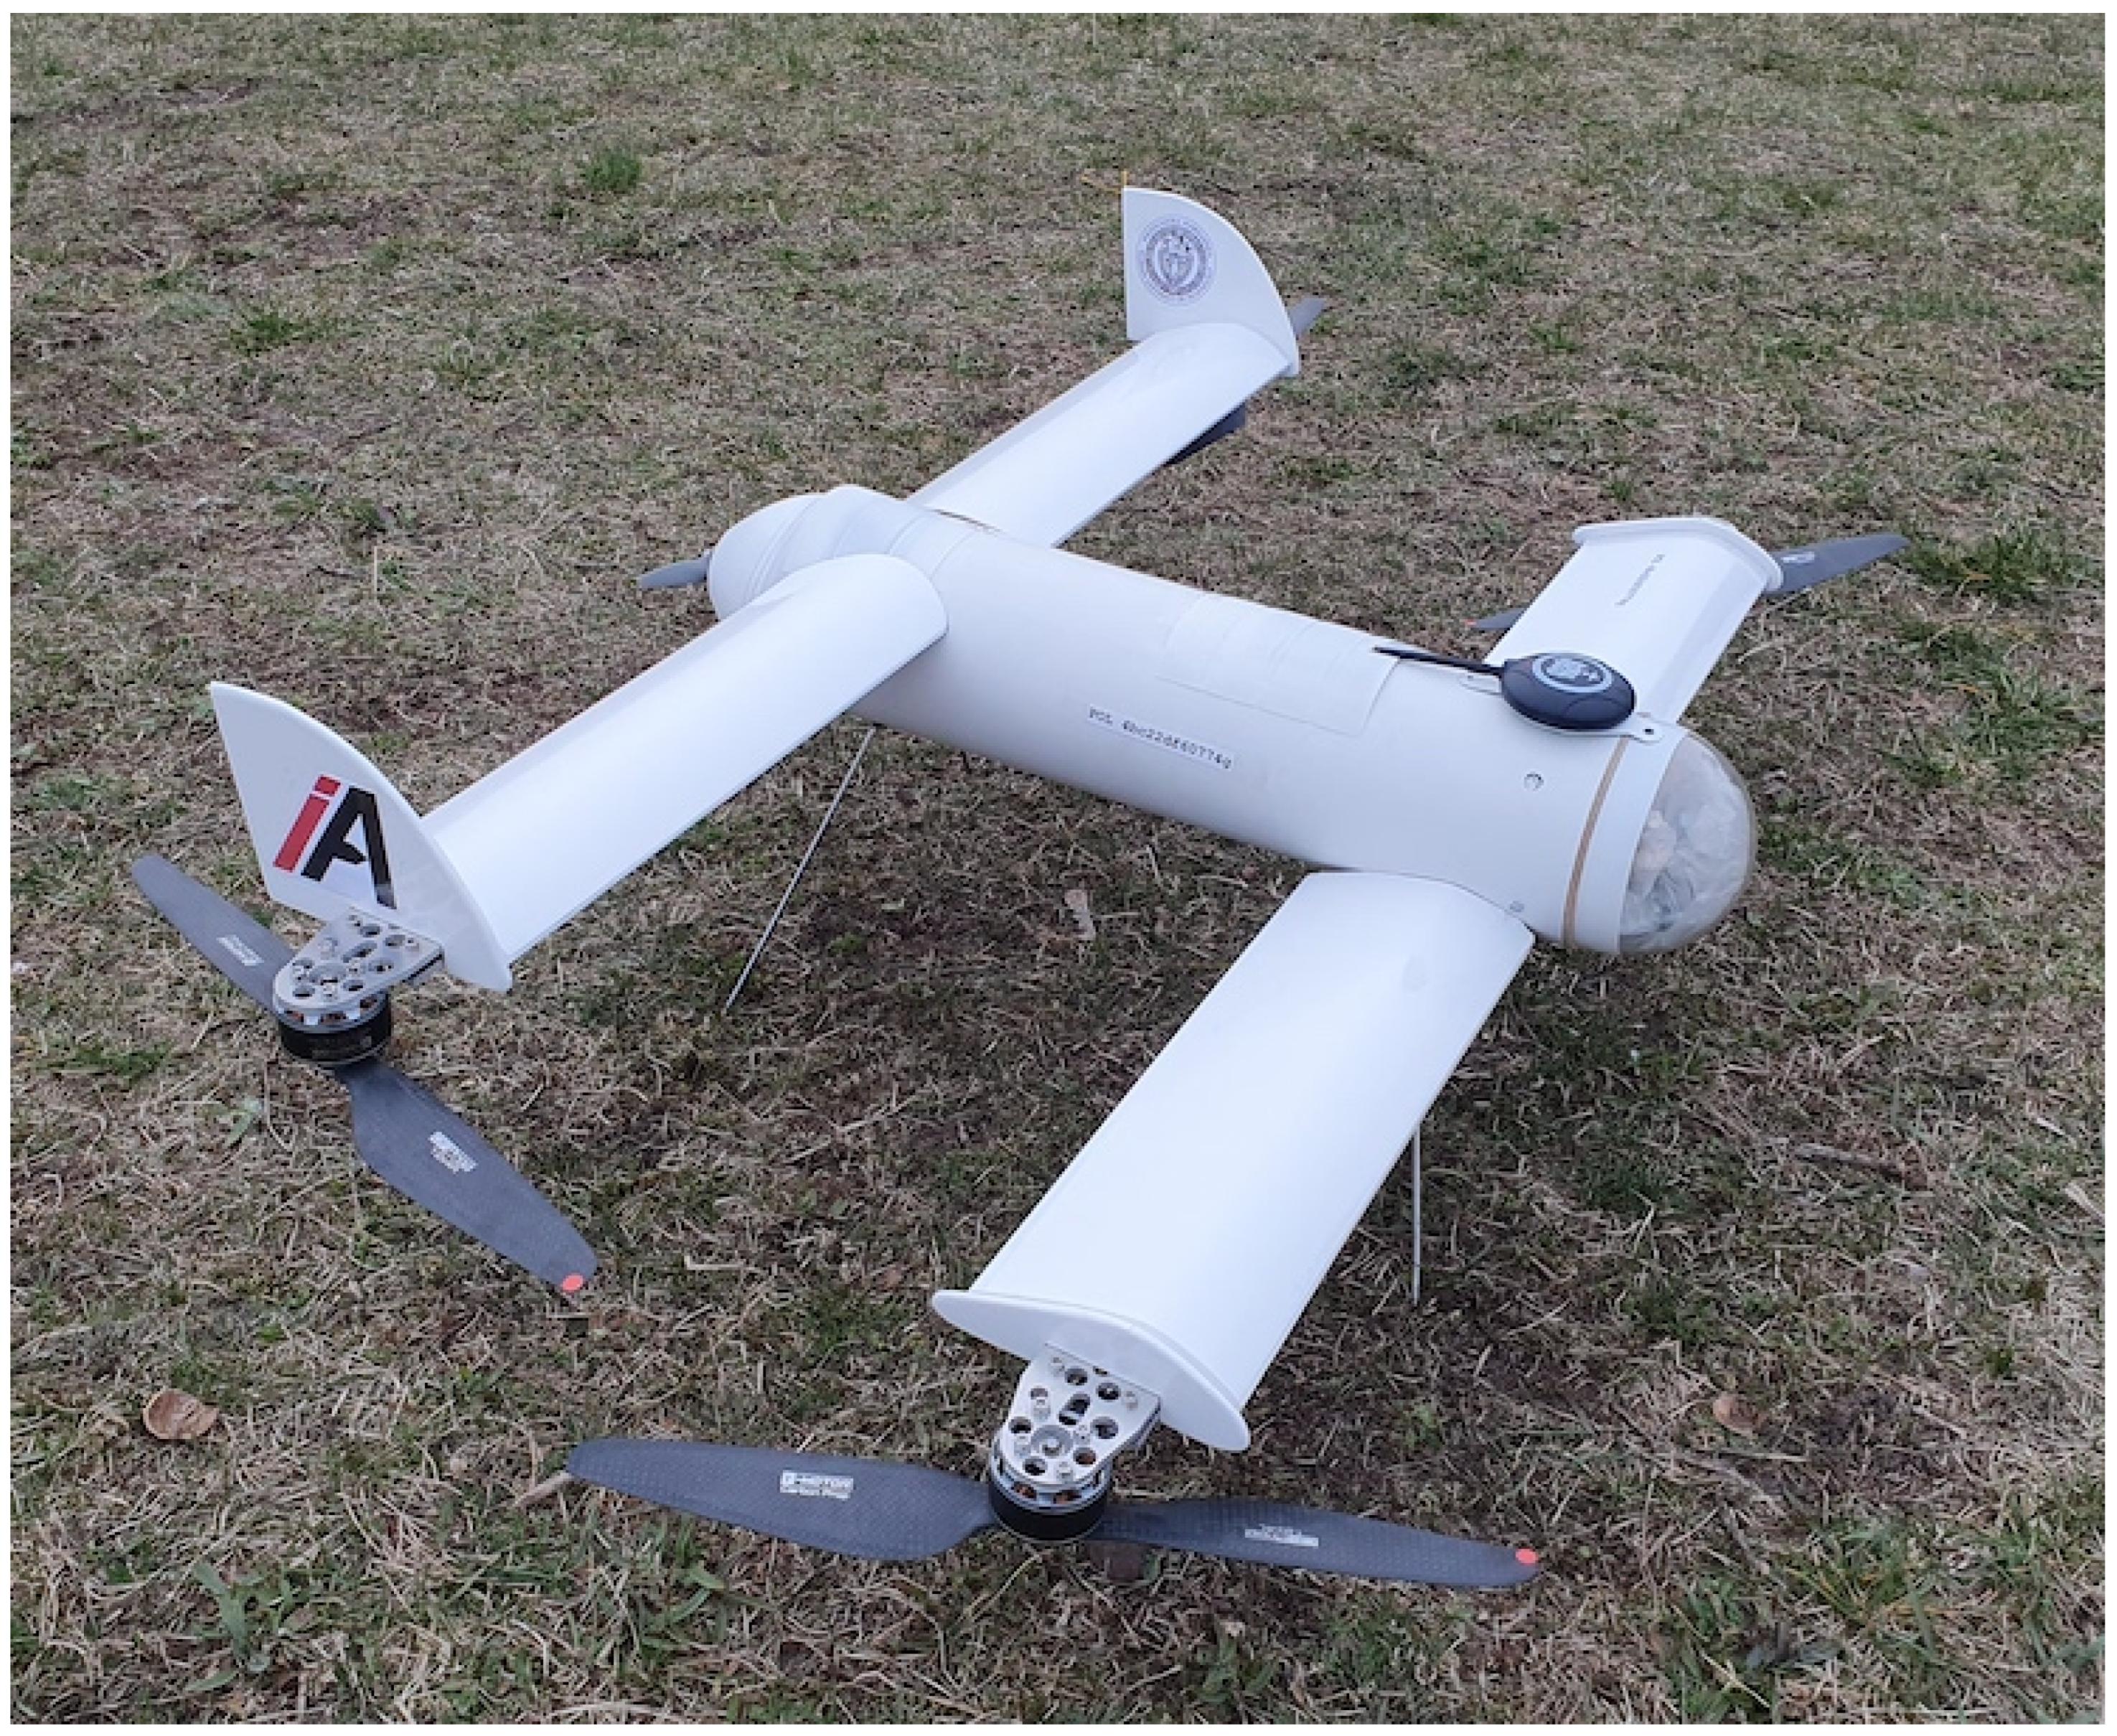 Uav Rc Plane: Types of UAV RC Planes: Features, Advantages and Accessories